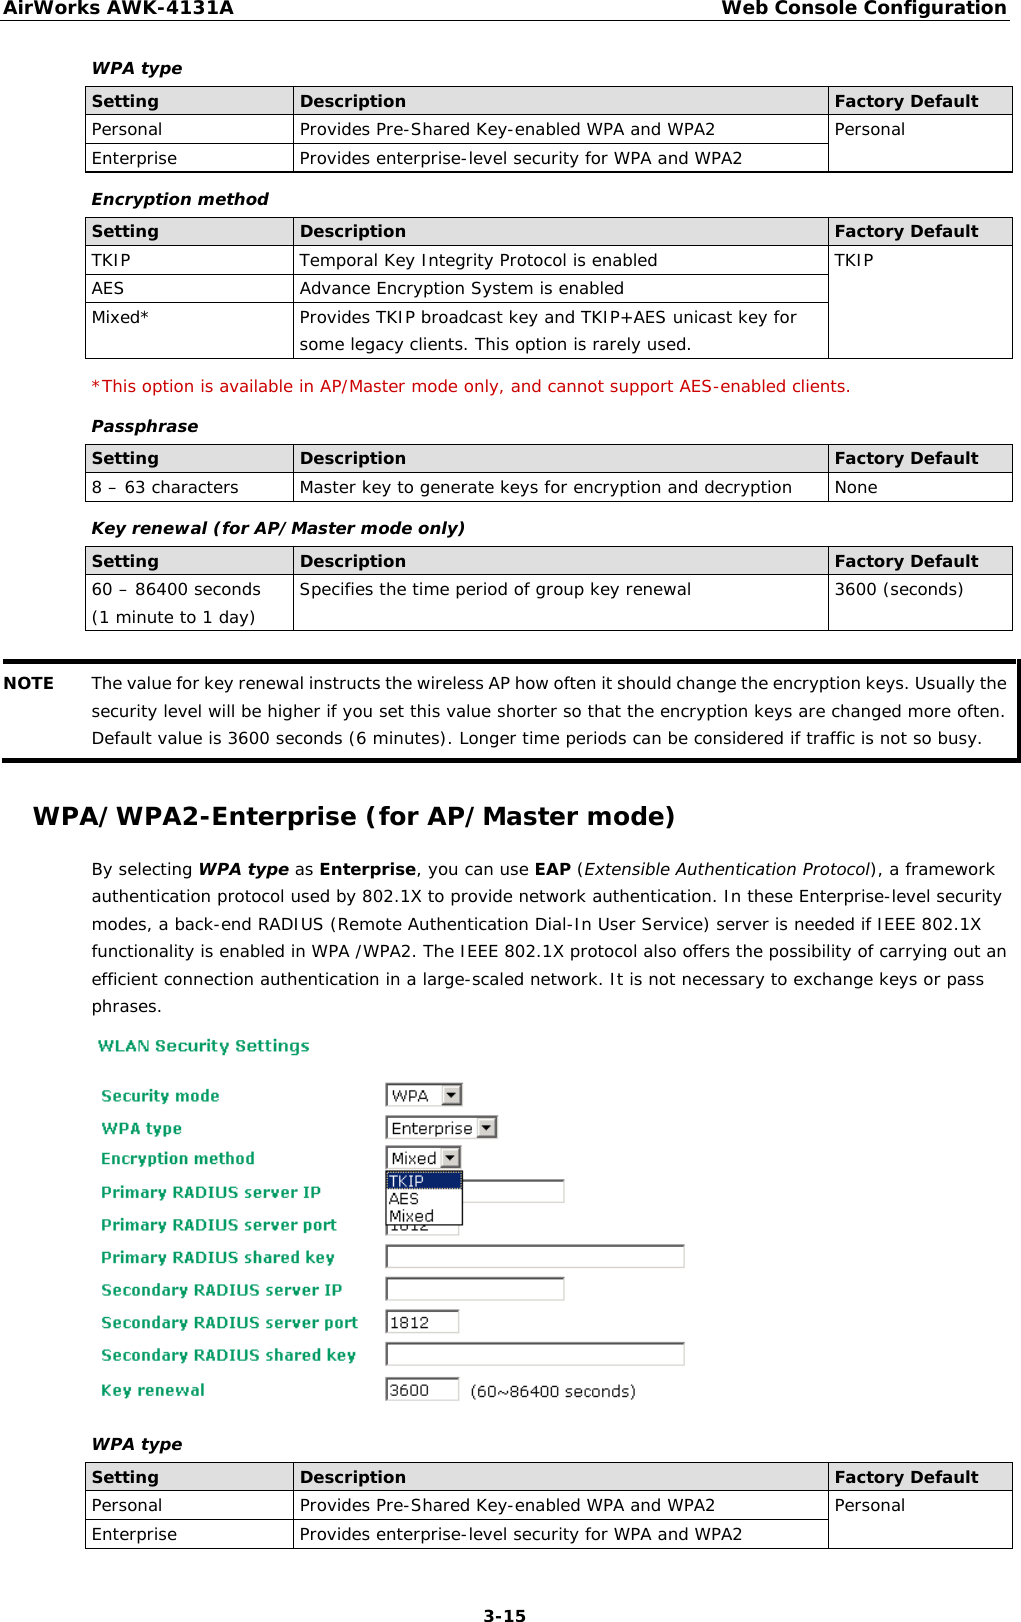 AirWorks AWK-4131A Web Console Configuration  3-15 WPA type Setting Description Factory Default Personal Provides Pre-Shared Key-enabled WPA and WPA2 Personal Enterprise Provides enterprise-level security for WPA and WPA2 Encryption method Setting Description Factory Default TKIP  Temporal Key Integrity Protocol is enabled  TKIP AES Advance Encryption System is enabled Mixed* Provides TKIP broadcast key and TKIP+AES unicast key for some legacy clients. This option is rarely used. *This option is available in AP/Master mode only, and cannot support AES-enabled clients. Passphrase Setting Description Factory Default 8 – 63 characters Master key to generate keys for encryption and decryption None Key renewal (for AP/Master mode only) Setting Description Factory Default 60 – 86400 seconds (1 minute to 1 day) Specifies the time period of group key renewal 3600 (seconds)  NOTE The value for key renewal instructs the wireless AP how often it should change the encryption keys. Usually the security level will be higher if you set this value shorter so that the encryption keys are changed more often. Default value is 3600 seconds (6 minutes). Longer time periods can be considered if traffic is not so busy.  WPA/WPA2-Enterprise (for AP/Master mode) By selecting WPA type as Enterprise, you can use EAP (Extensible Authentication Protocol), a framework authentication protocol used by 802.1X to provide network authentication. In these Enterprise-level security modes, a back-end RADIUS (Remote Authentication Dial-In User Service) server is needed if IEEE 802.1X functionality is enabled in WPA /WPA2. The IEEE 802.1X protocol also offers the possibility of carrying out an efficient connection authentication in a large-scaled network. It is not necessary to exchange keys or pass phrases.  WPA type Setting Description Factory Default Personal Provides Pre-Shared Key-enabled WPA and WPA2 Personal Enterprise Provides enterprise-level security for WPA and WPA2 